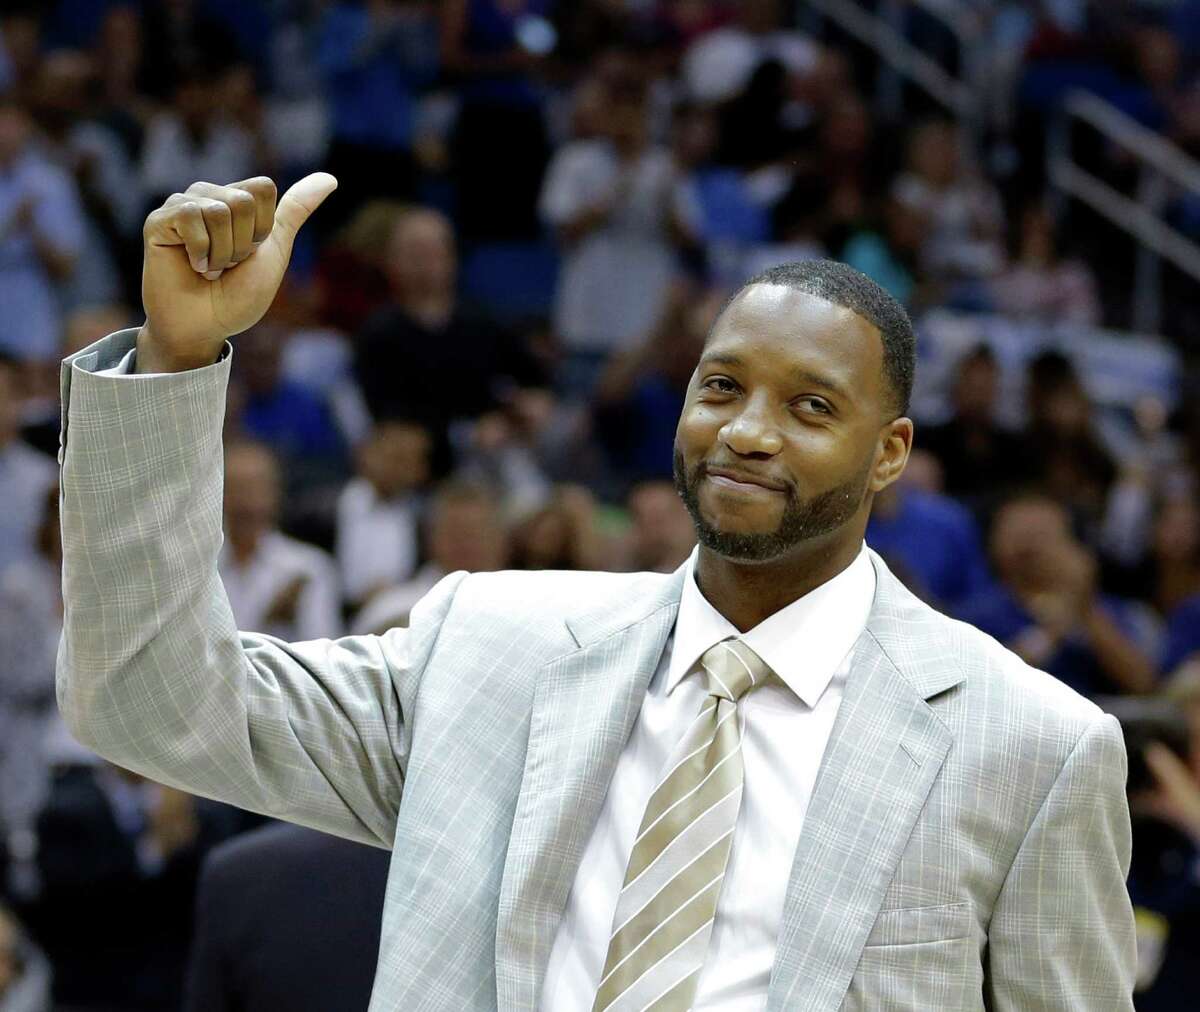 Now an NBA analyst for ESPN's ﻿"The Jump," Tracy McGrady says he had to adjust his game when a trade to the Rockets made him Yao Ming's teammate.